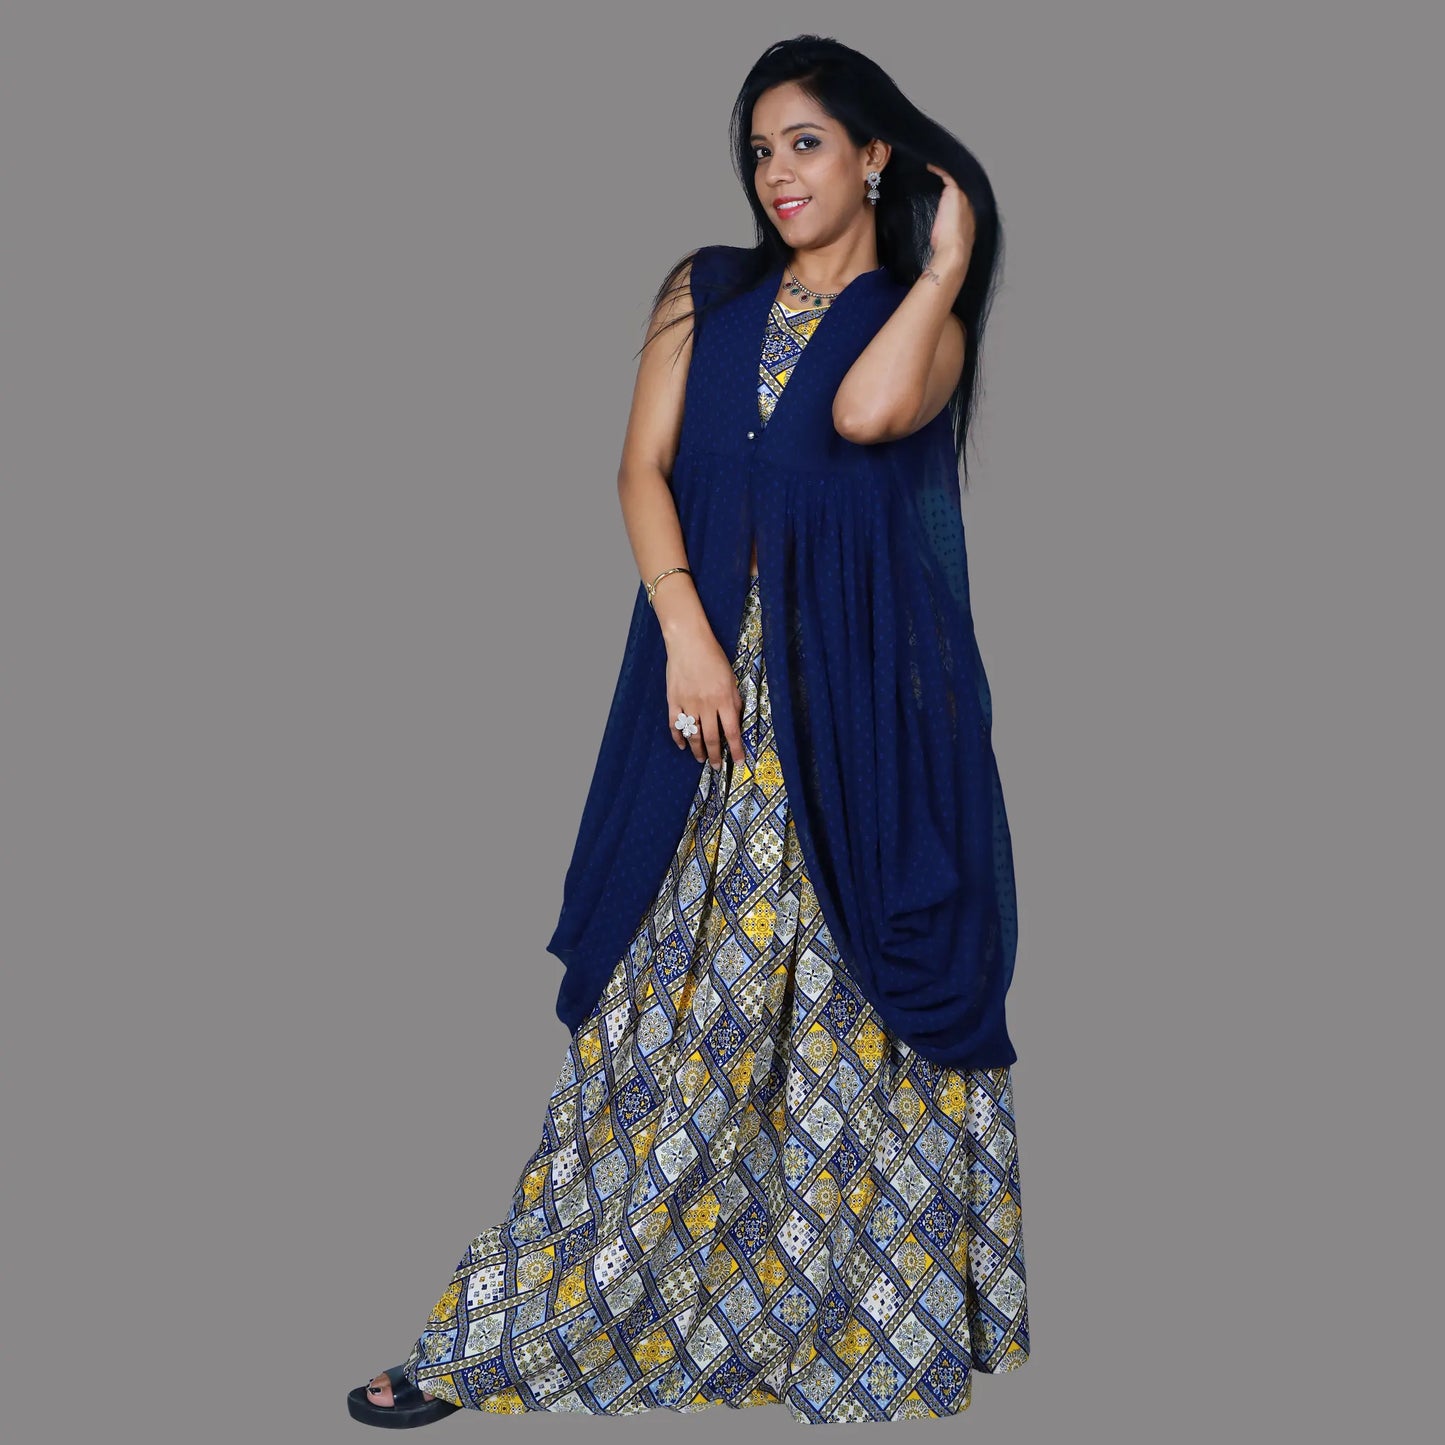 Women's Navy Blue Printed Straight Top with Skirt and Shrug | S3SBL1219